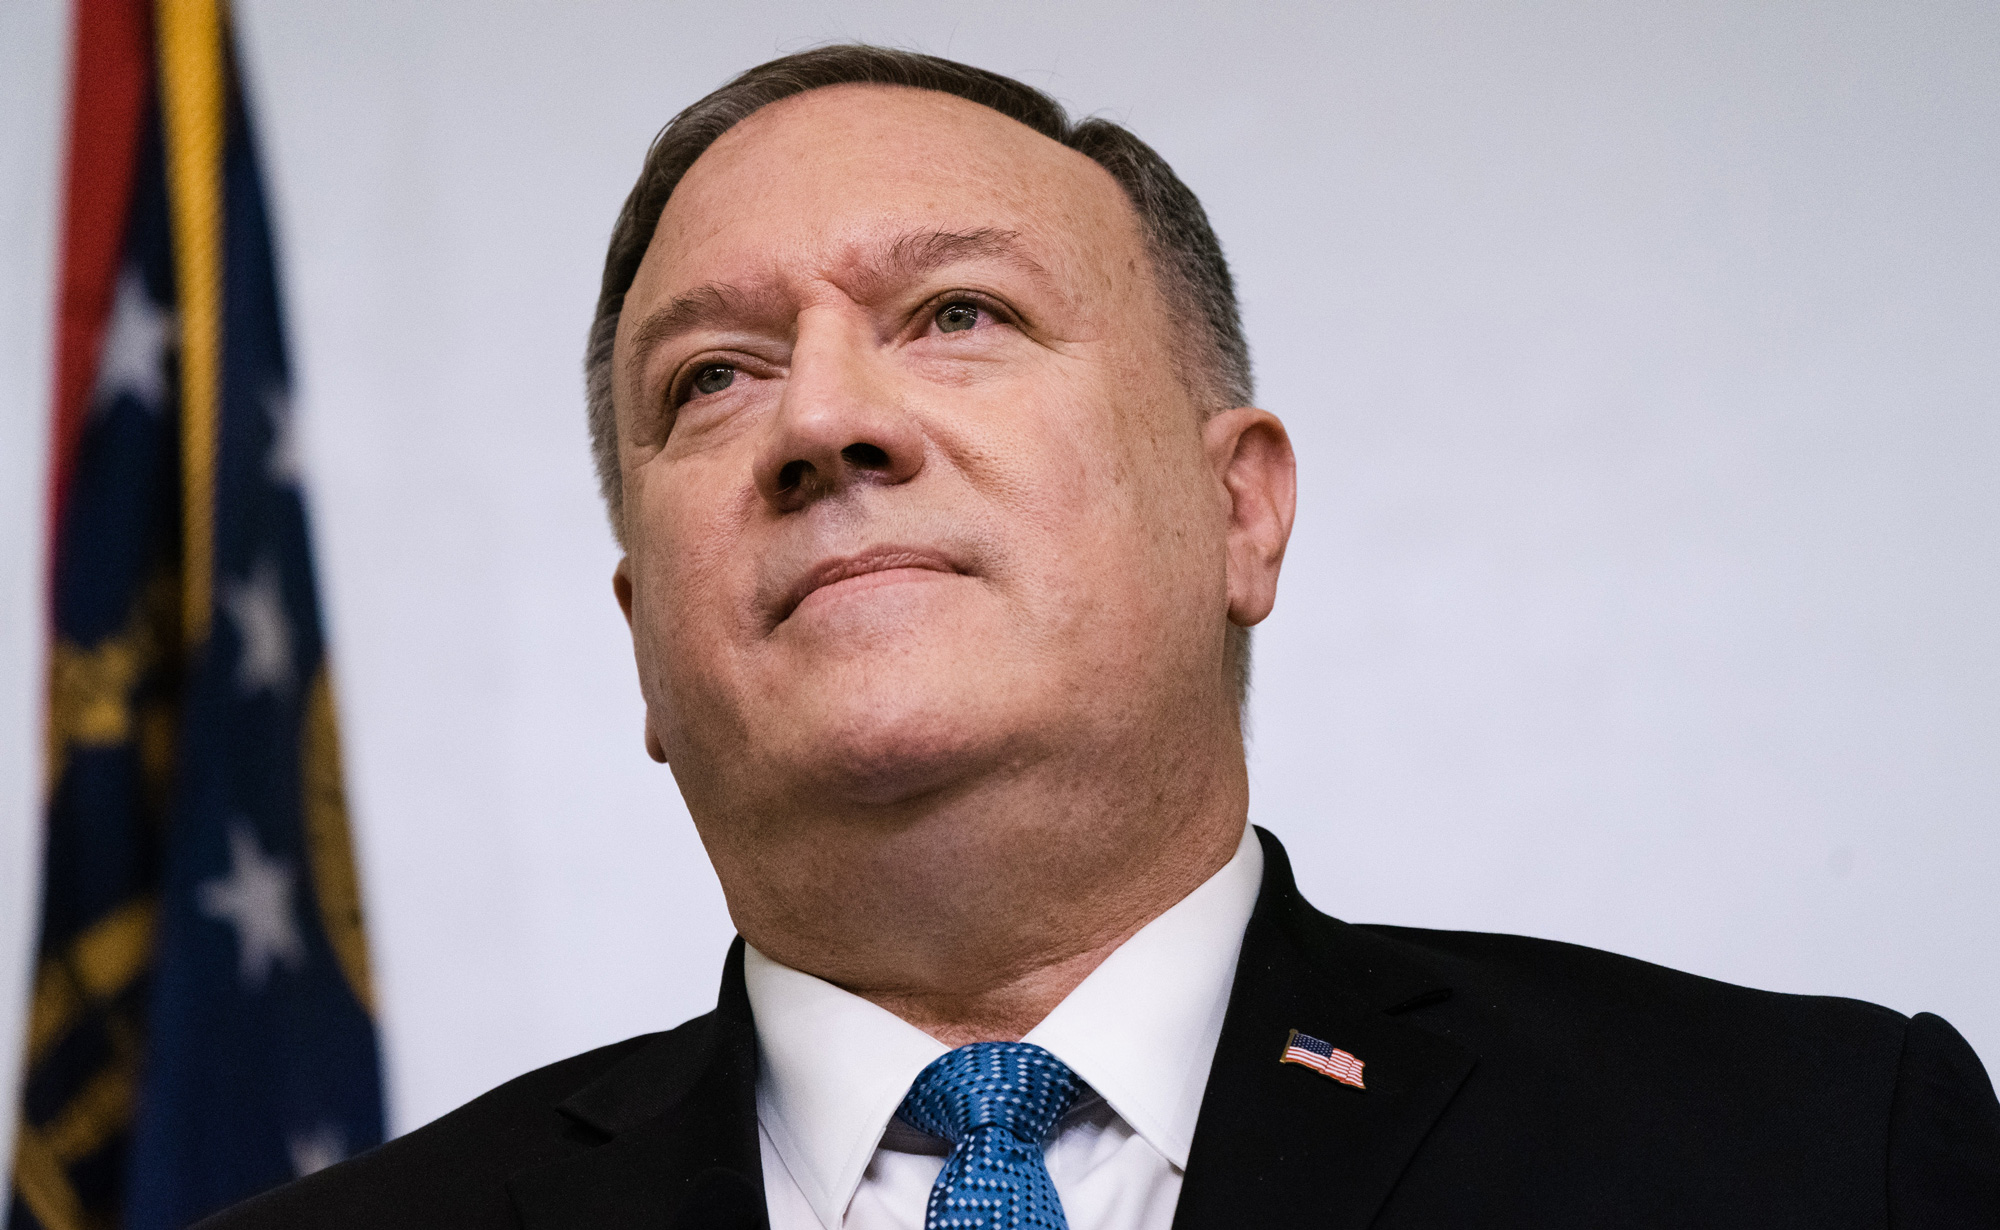 Secretary of State Michael Pompeo pauses while speaking at the Georgia Institute of Technology in Atlanta, on December 9.